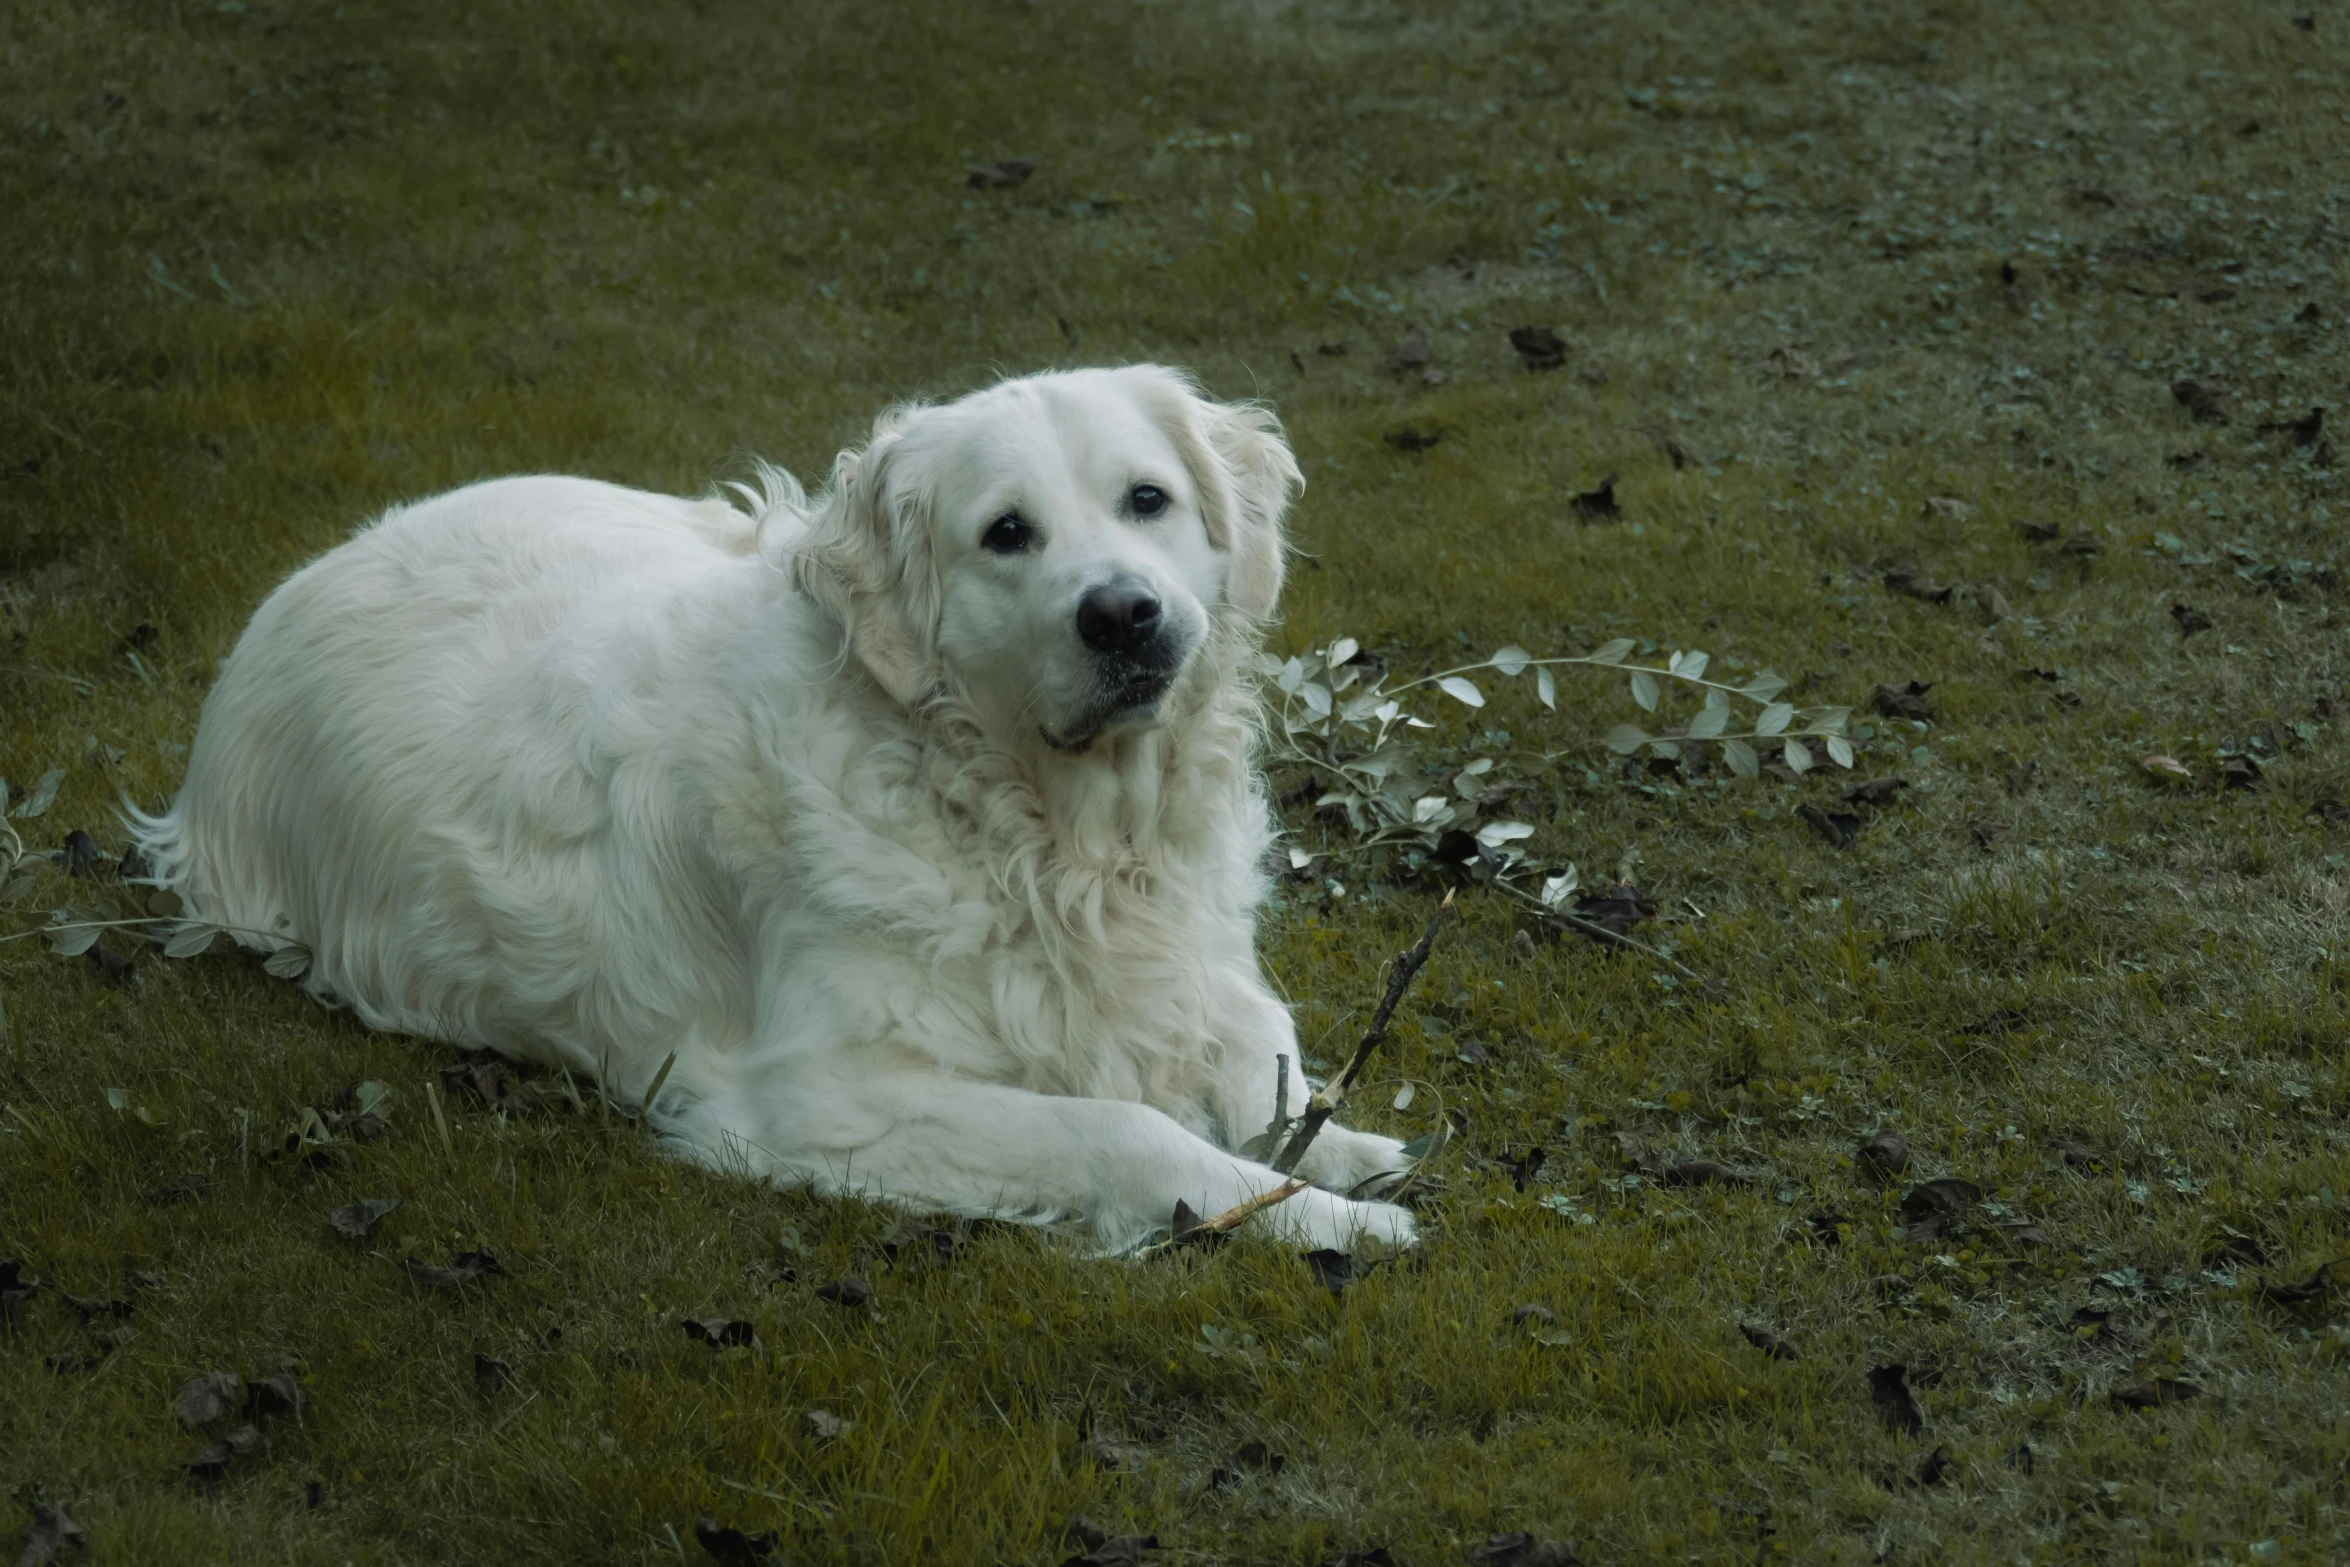 the large white dog is laying down in the grass